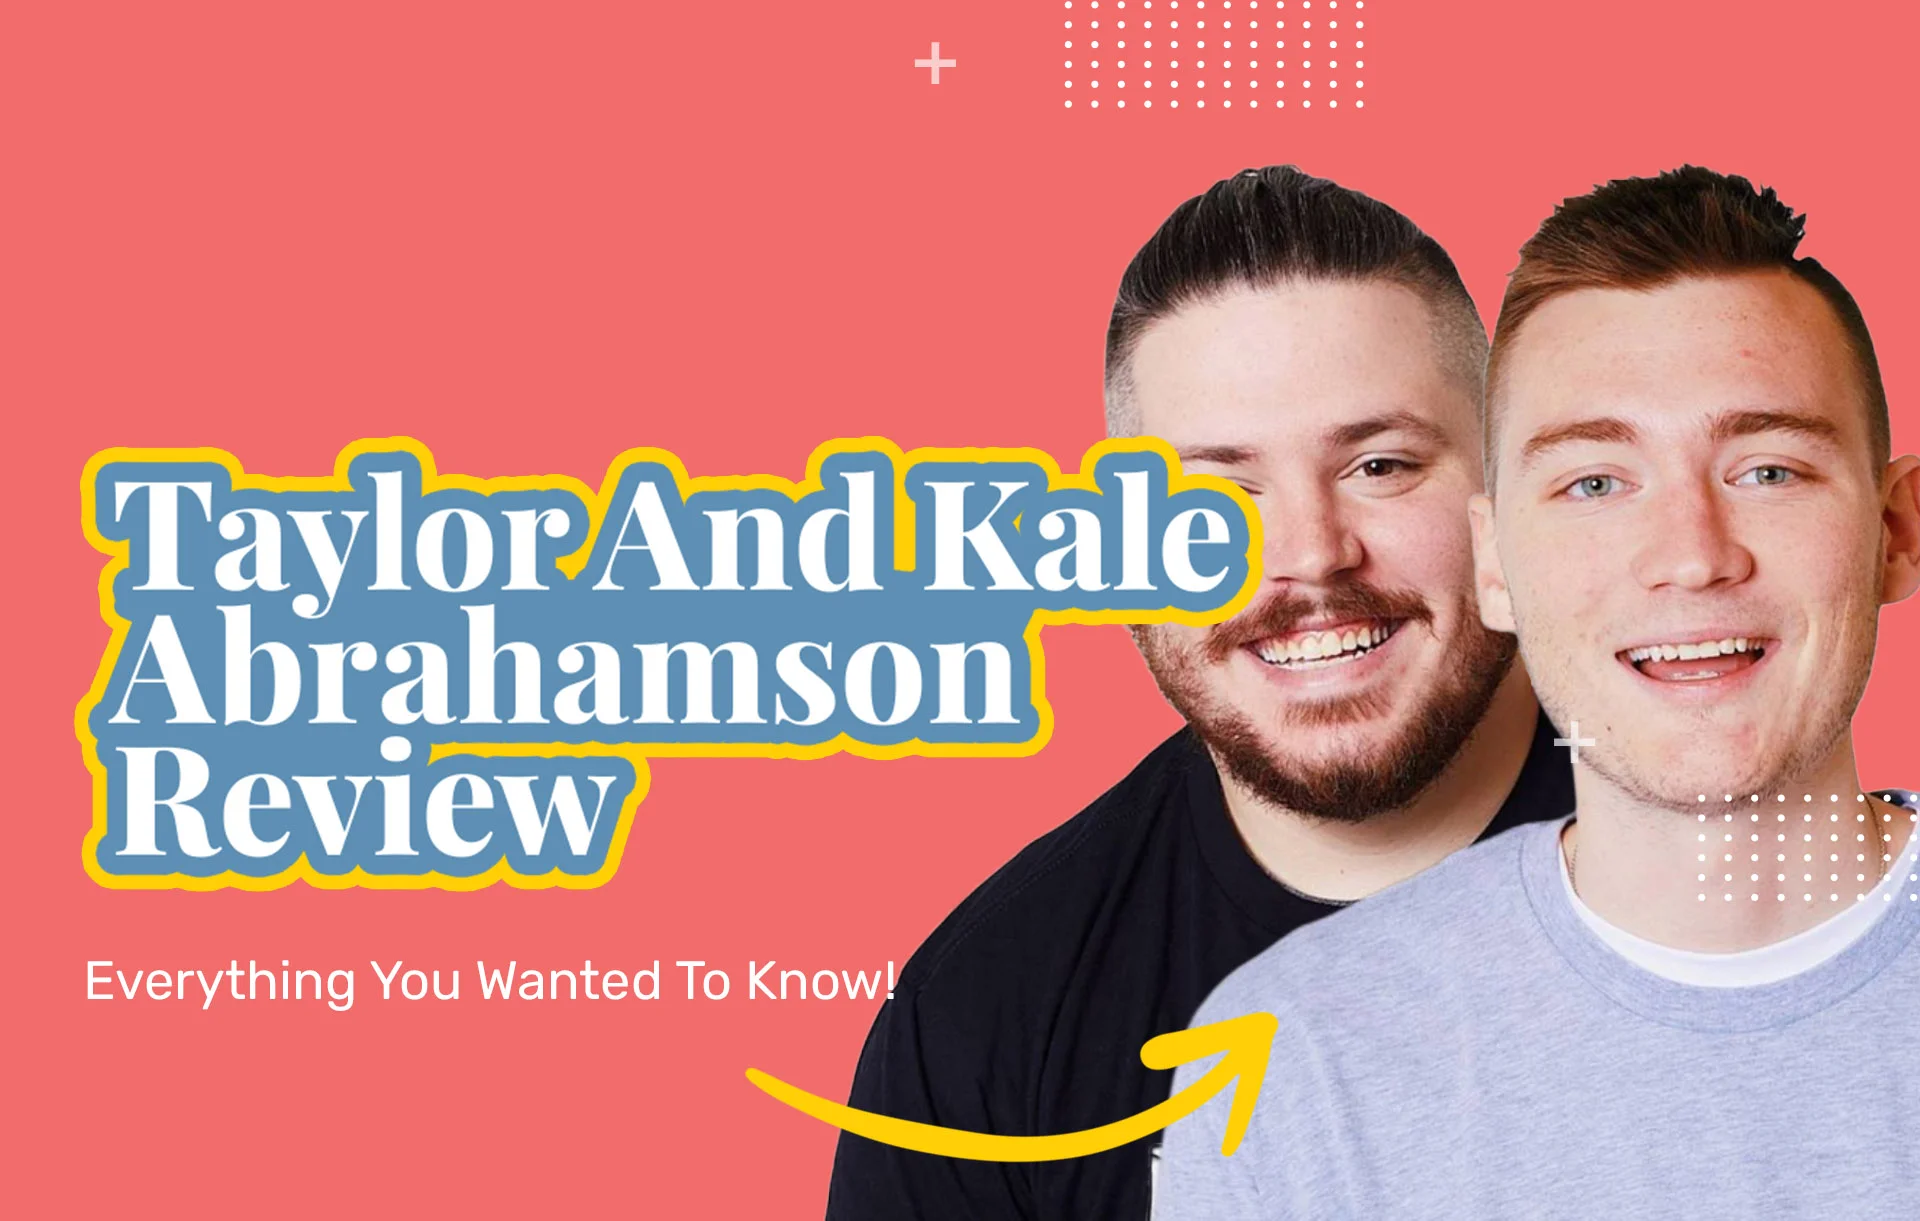 Kale and Taylor Review: Best Amazon FBA Course?